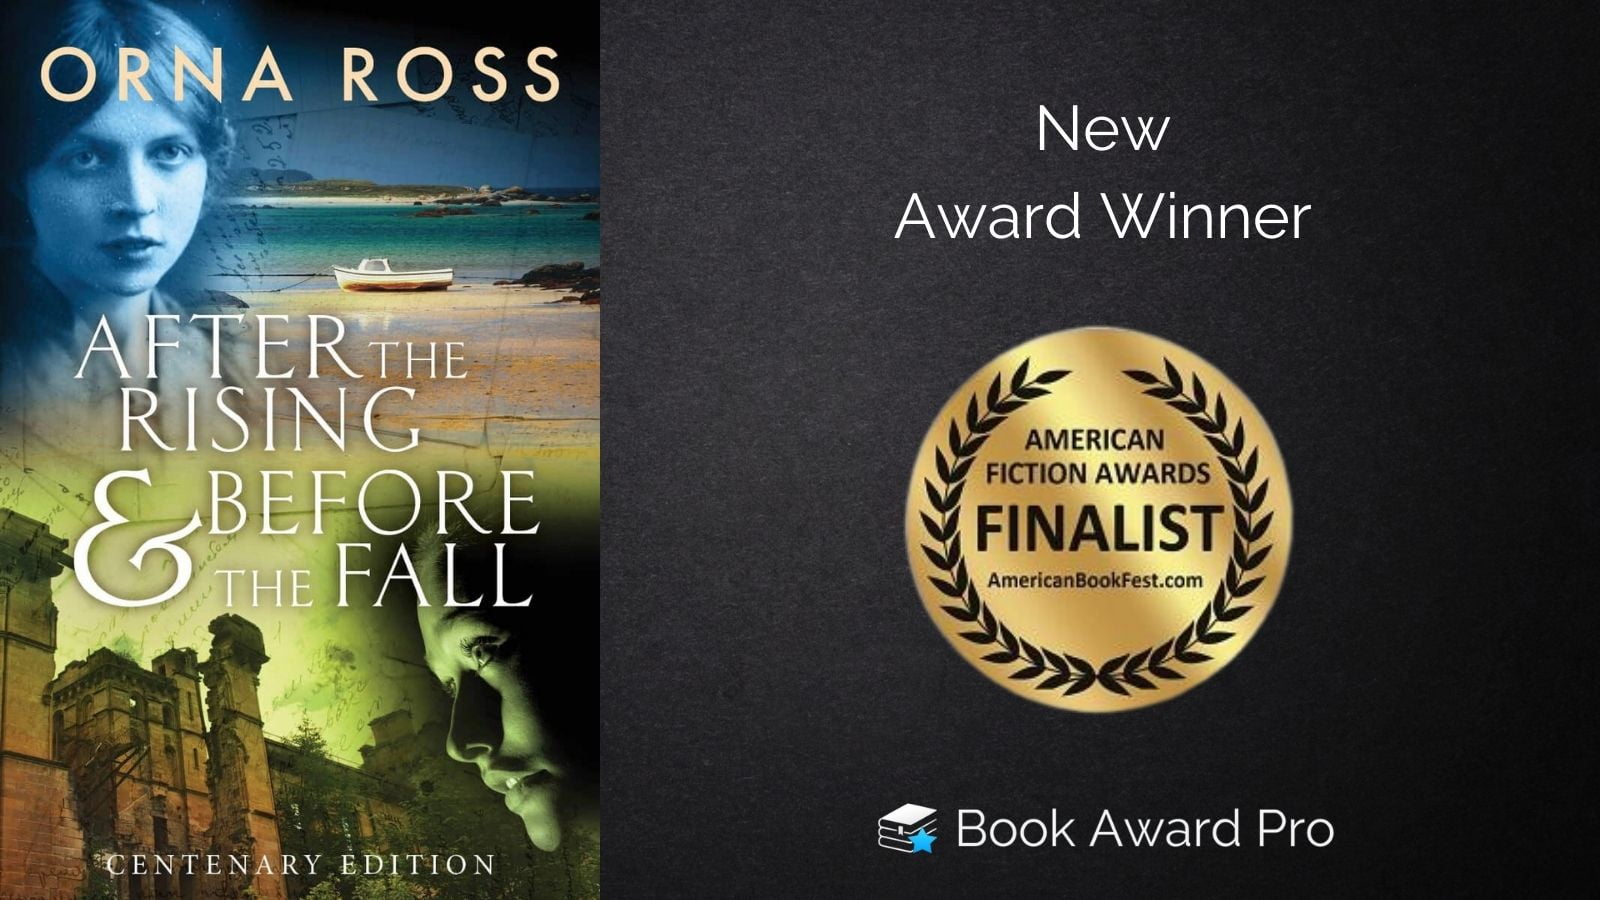 After the Rising & Before the Fall - American Fiction Awards Winner